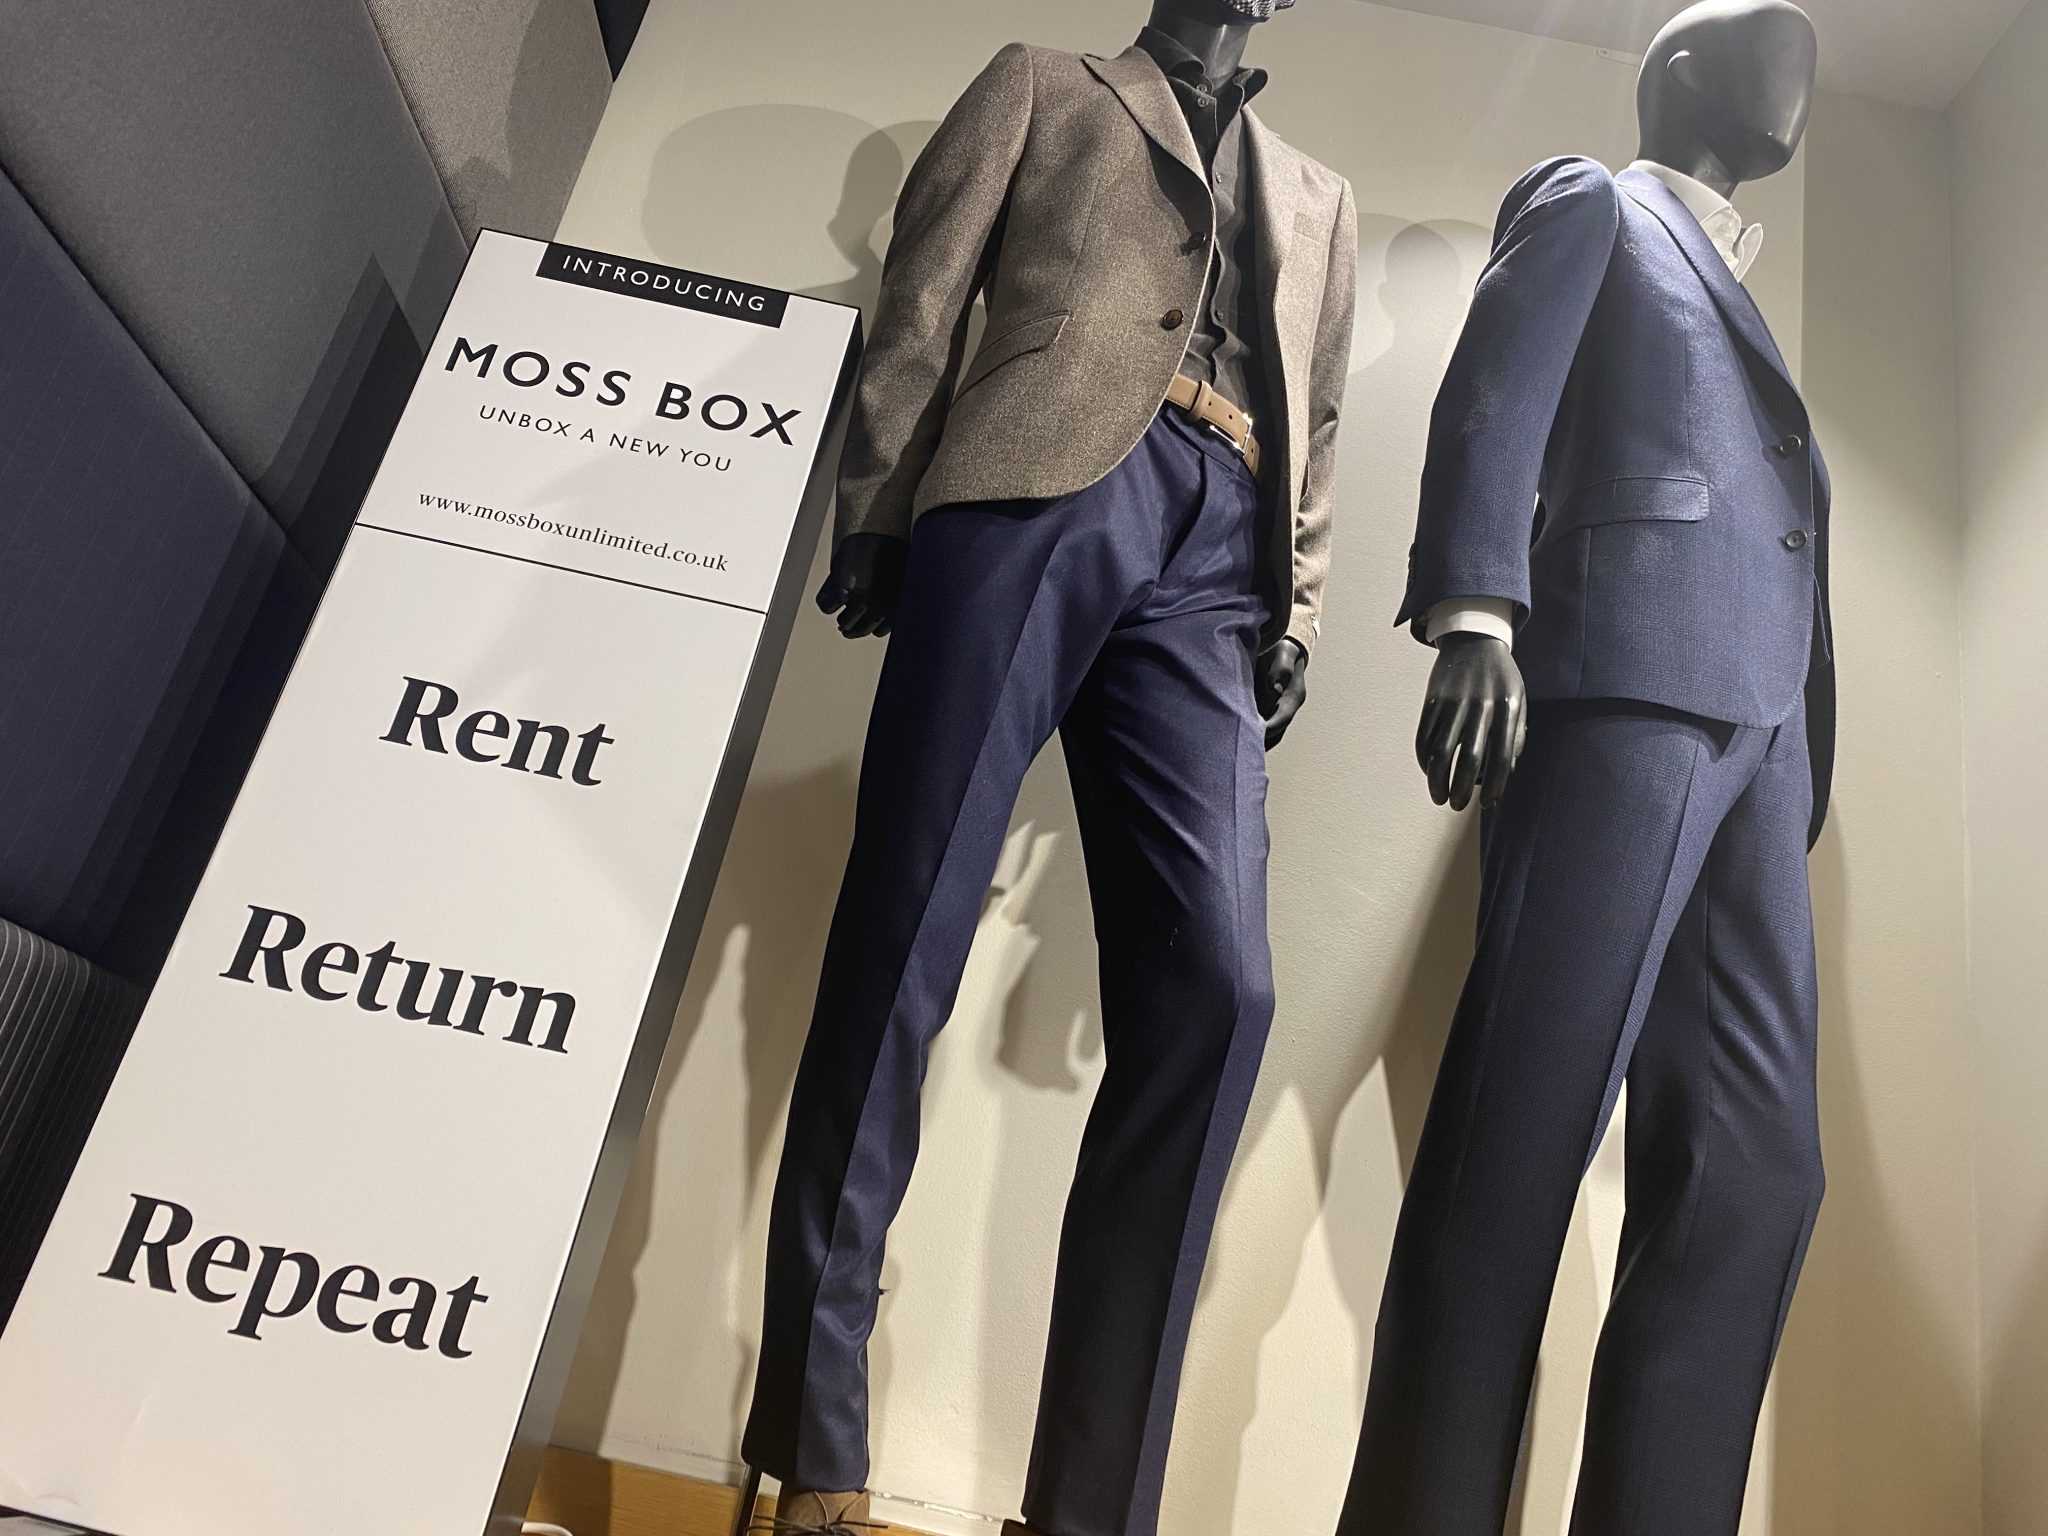 Moss Bros to sell preloved items on eBay